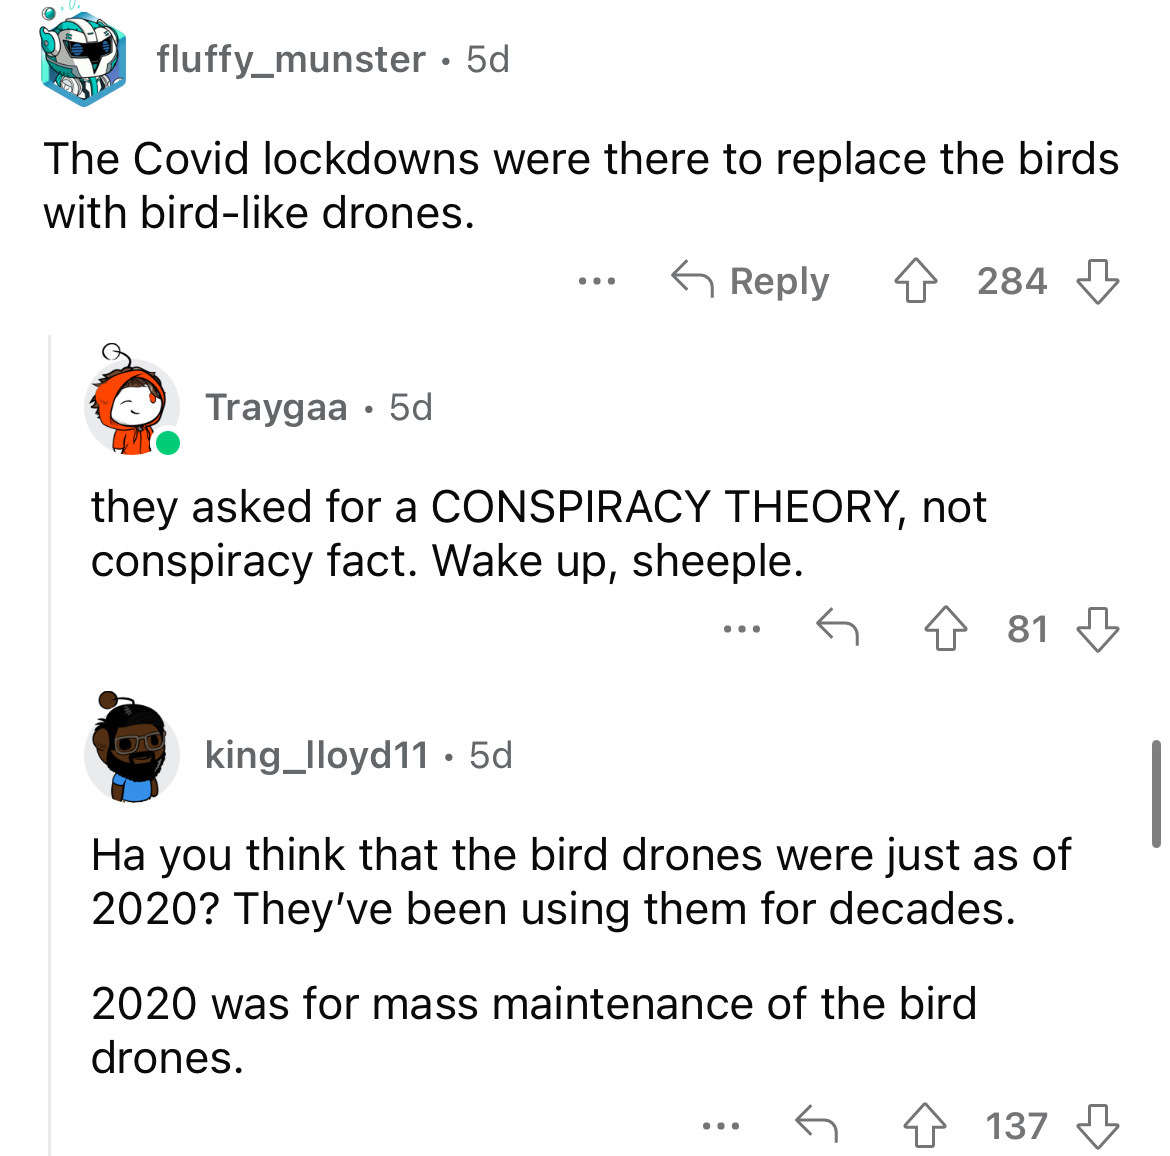 angle - fluffy_munster 5d The Covid lockdowns were there to replace the birds with bird drones. ... Traygaa 5d they asked for a Conspiracy Theory, not conspiracy fact. Wake up, sheeple. 284 2020 was for mass maintenance of the bird drones. king_lloyd11. 5